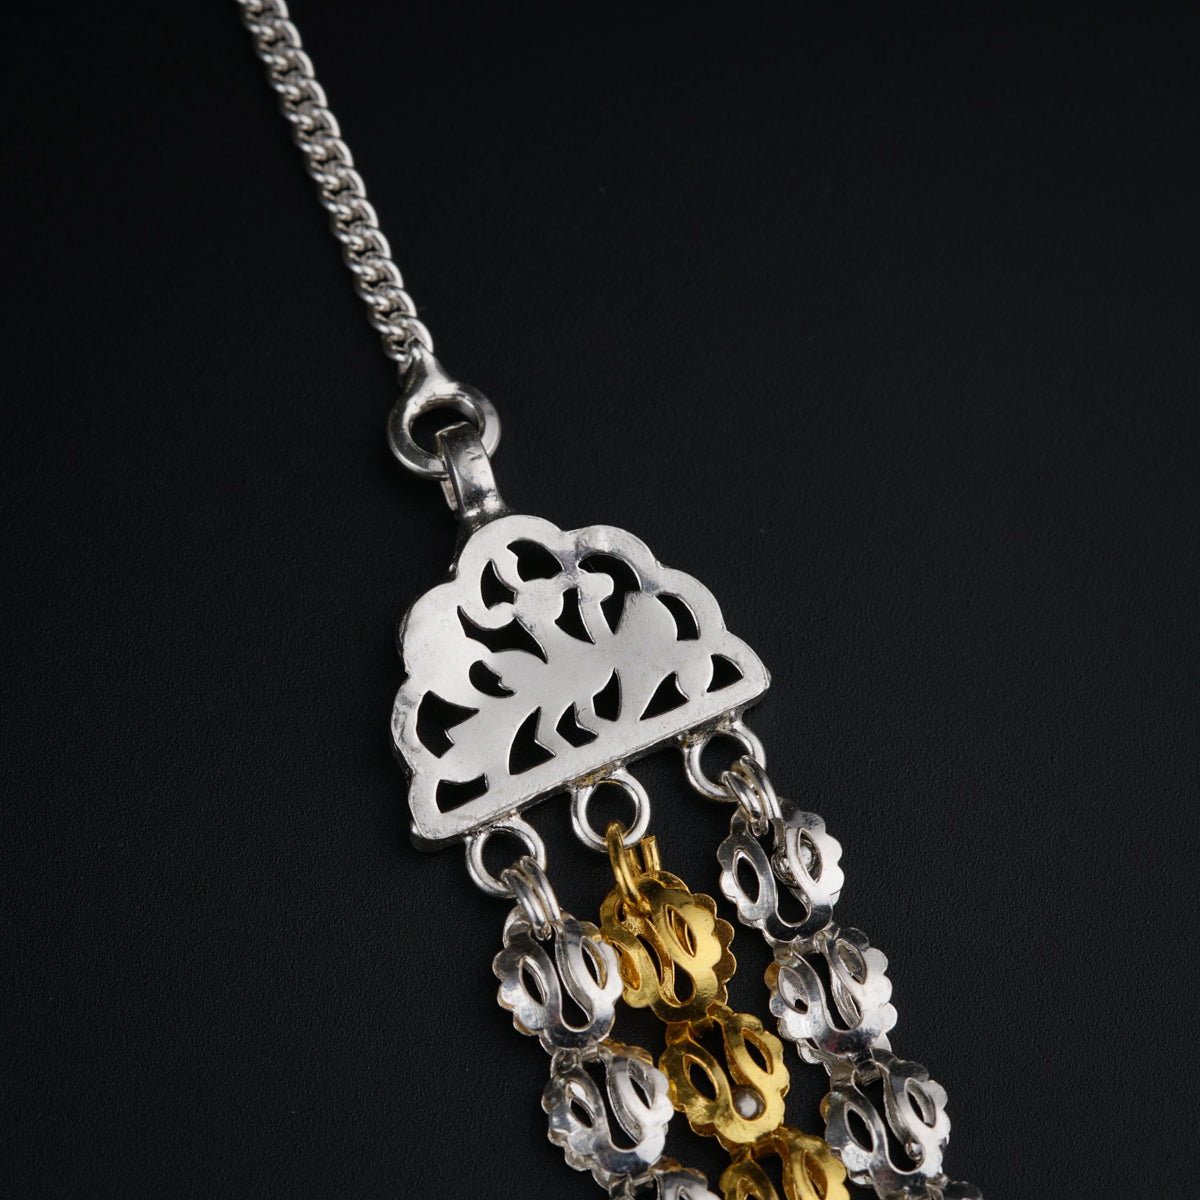 a silver and gold necklace on a black background